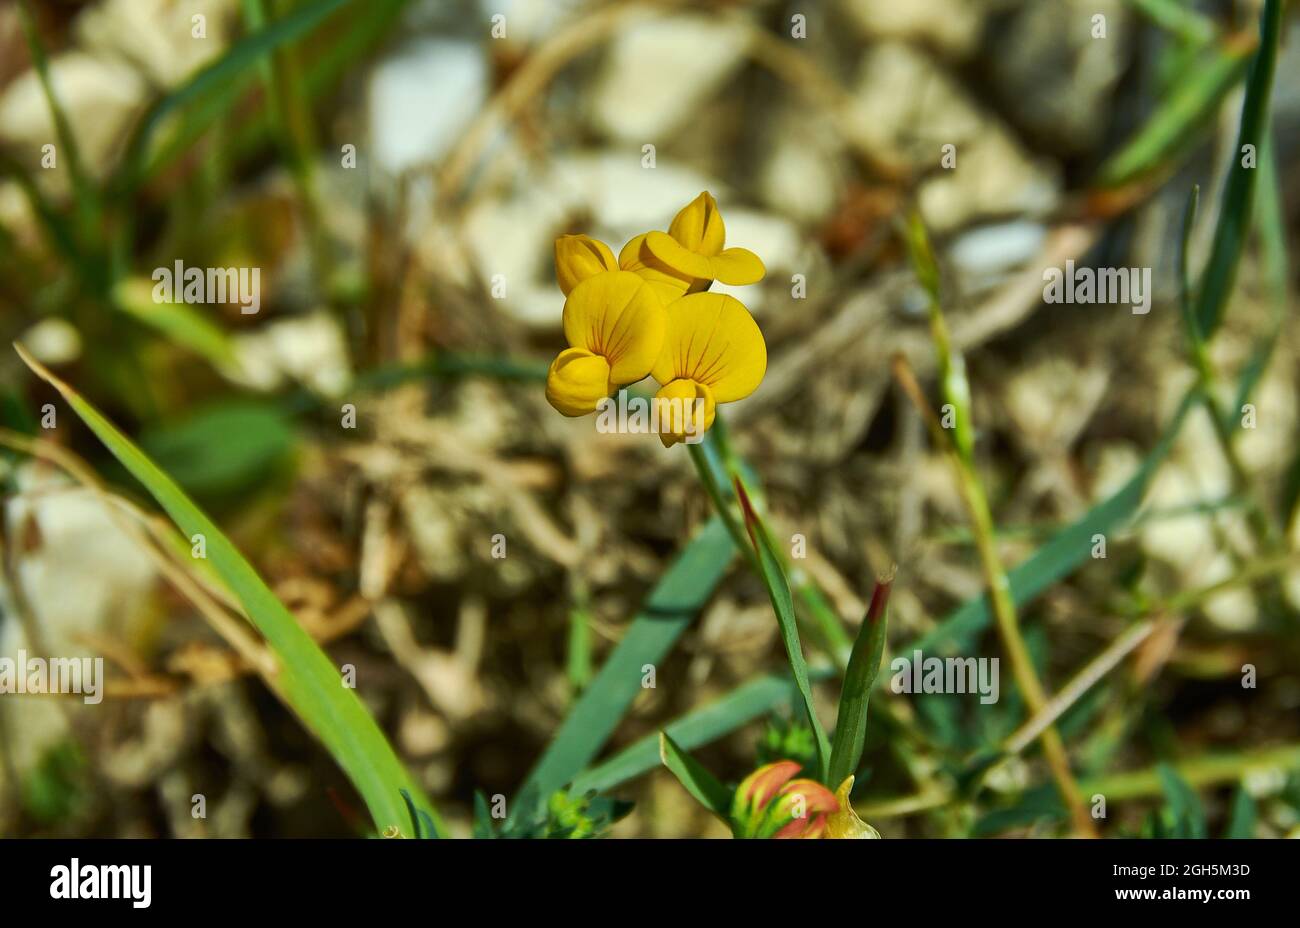 Lotus corniculatus,  flowering plant in the pea family Fabaceae, native to grasslands in temperate Eurasia and North Africa Stock Photo